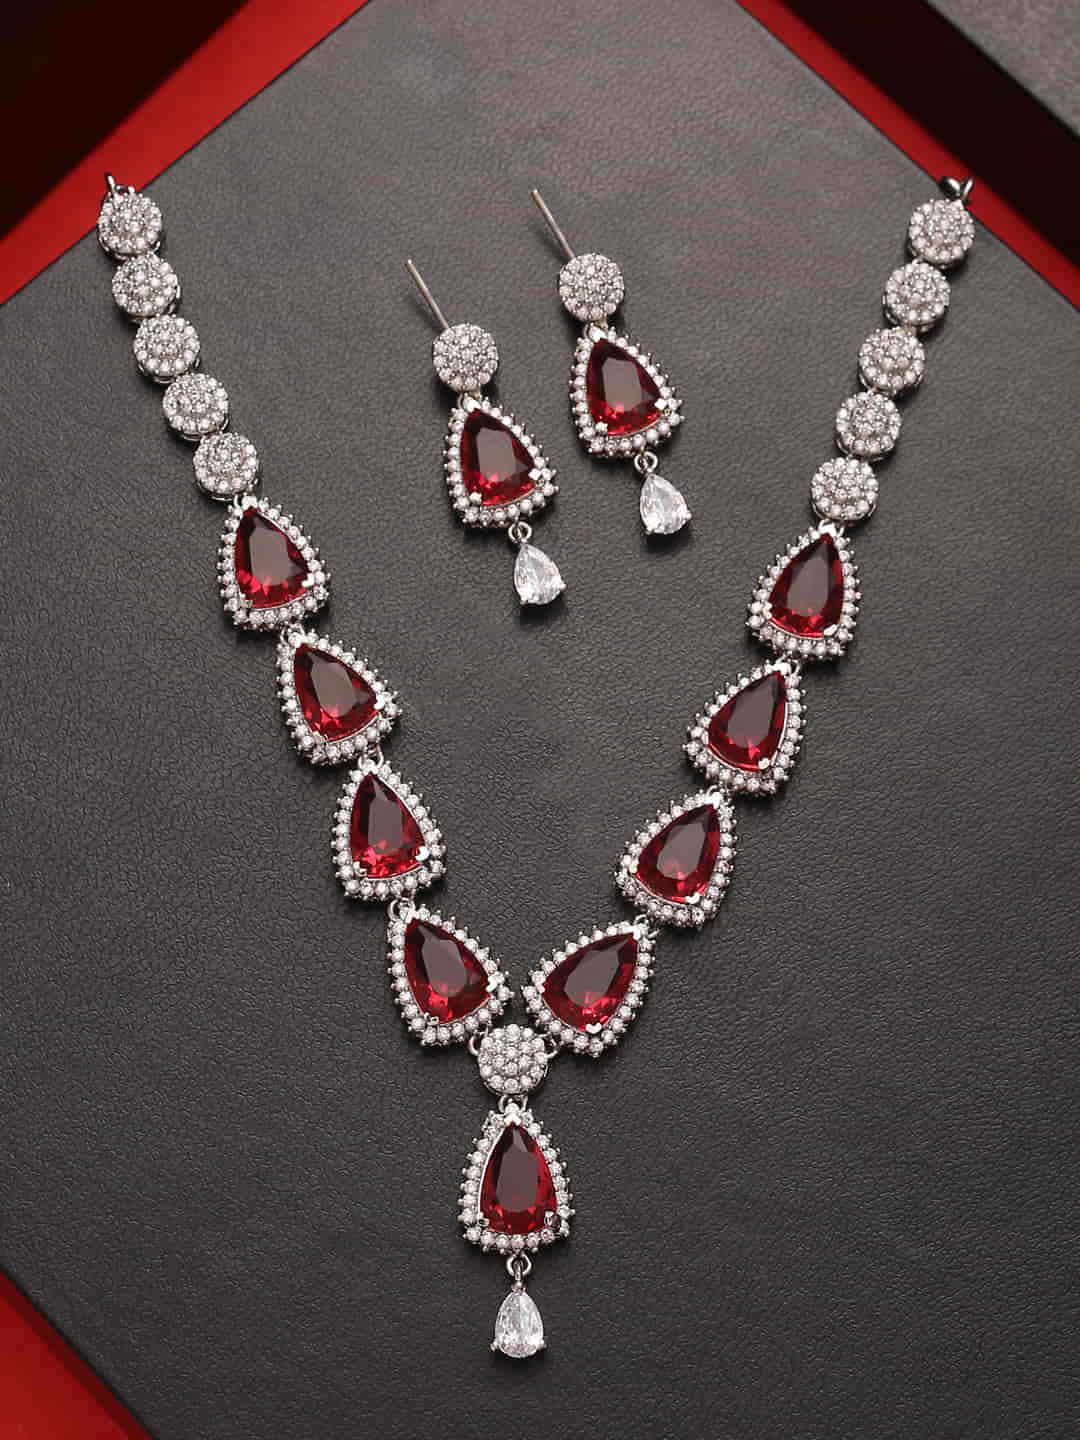 Red American Diamond Necklace for Parties - Wedding Gift - Diamond Necklace  Design -Victoria Crystal Necklace Set - Ruby Red By Blingvine